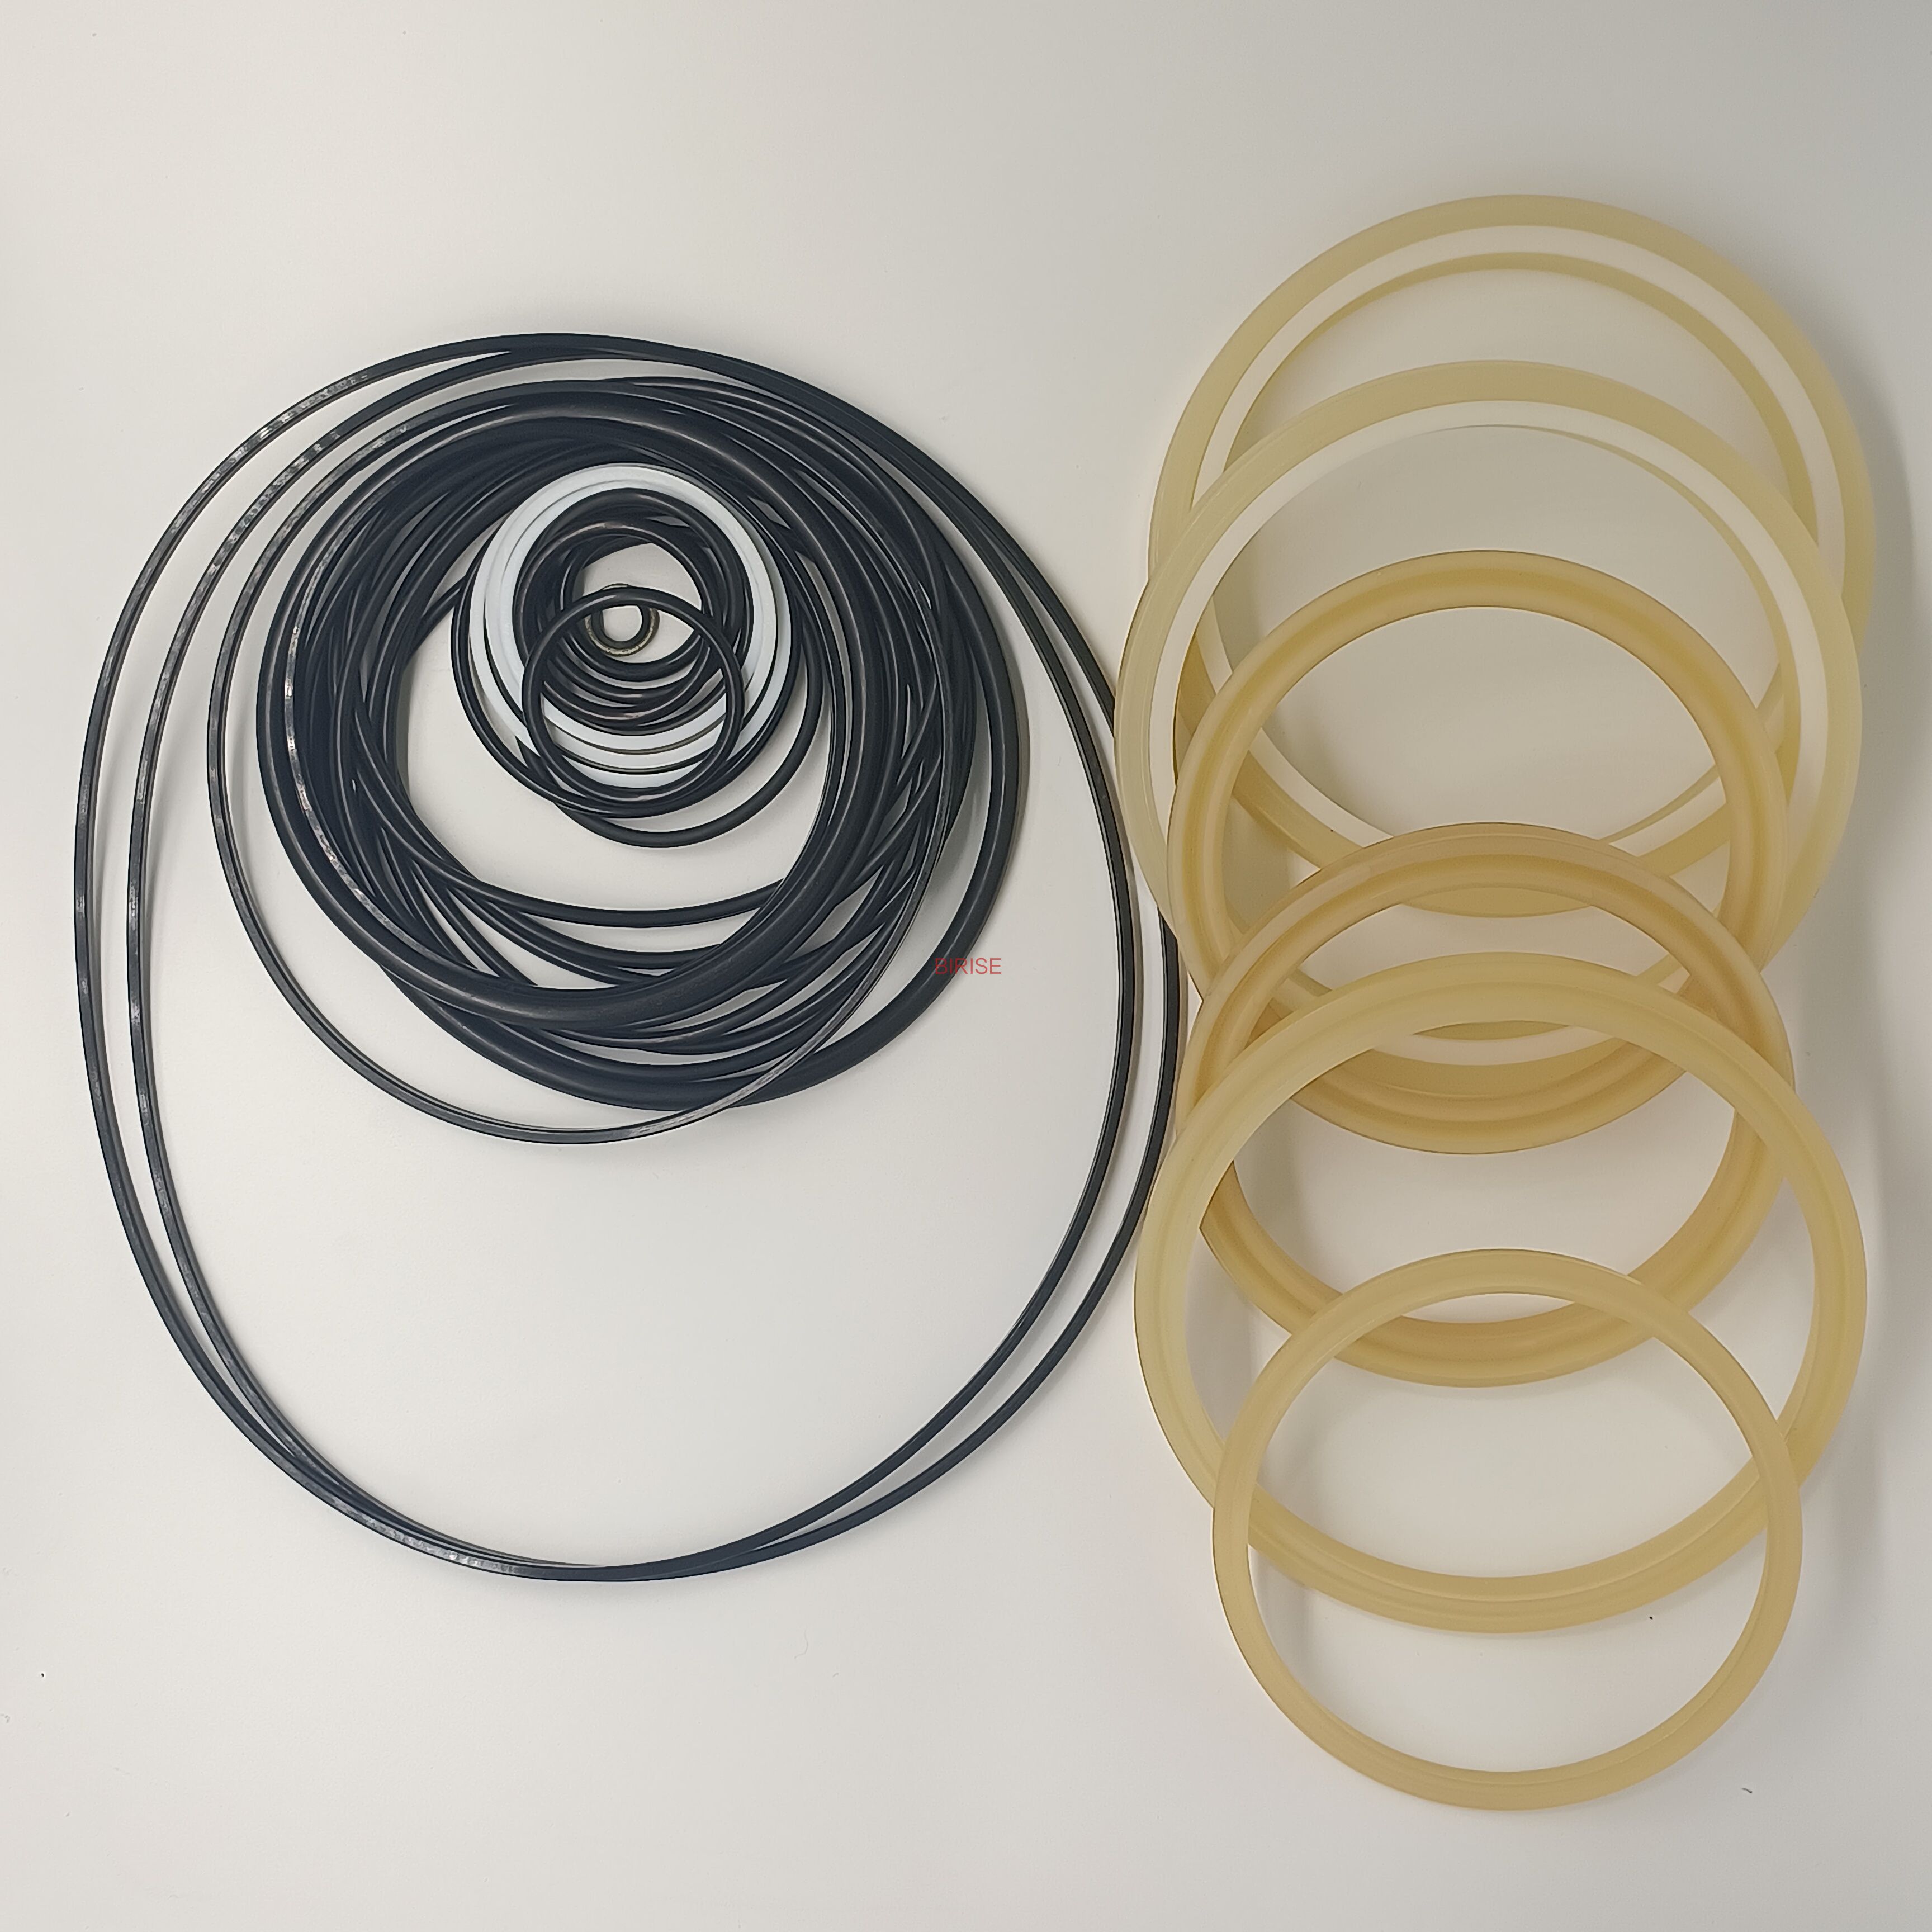 Hydraulic Breaker Seal Kits for Efficient Component Maintenance